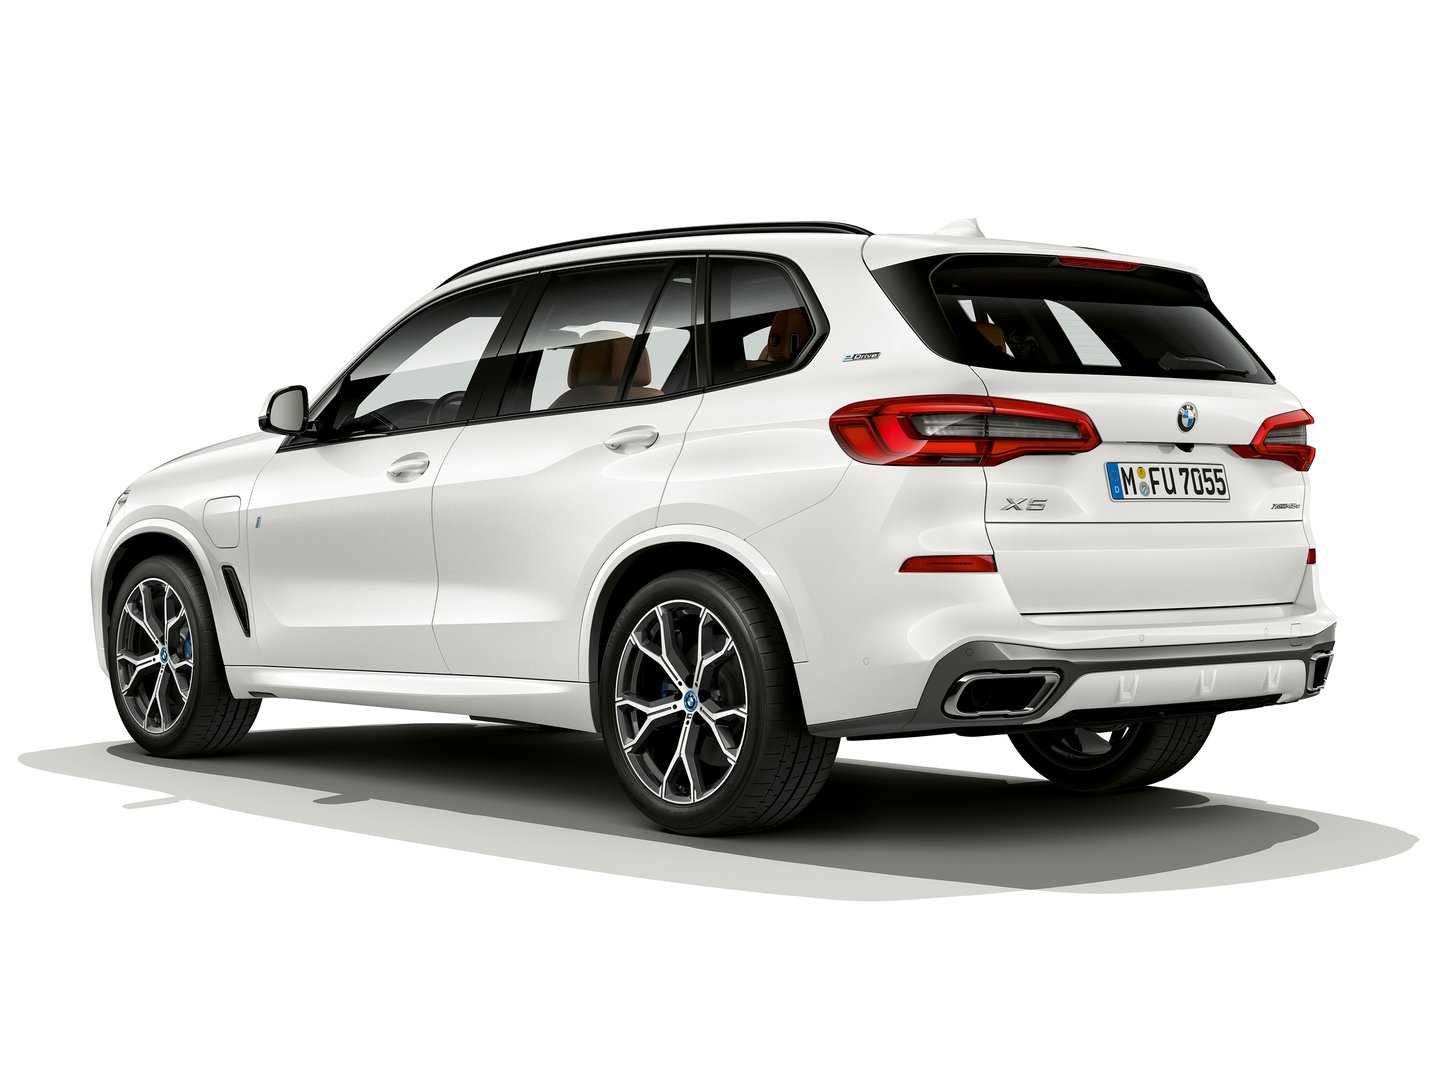 BMW X5 iPerformance is seventh member of BMW Hybrid cars - Driving